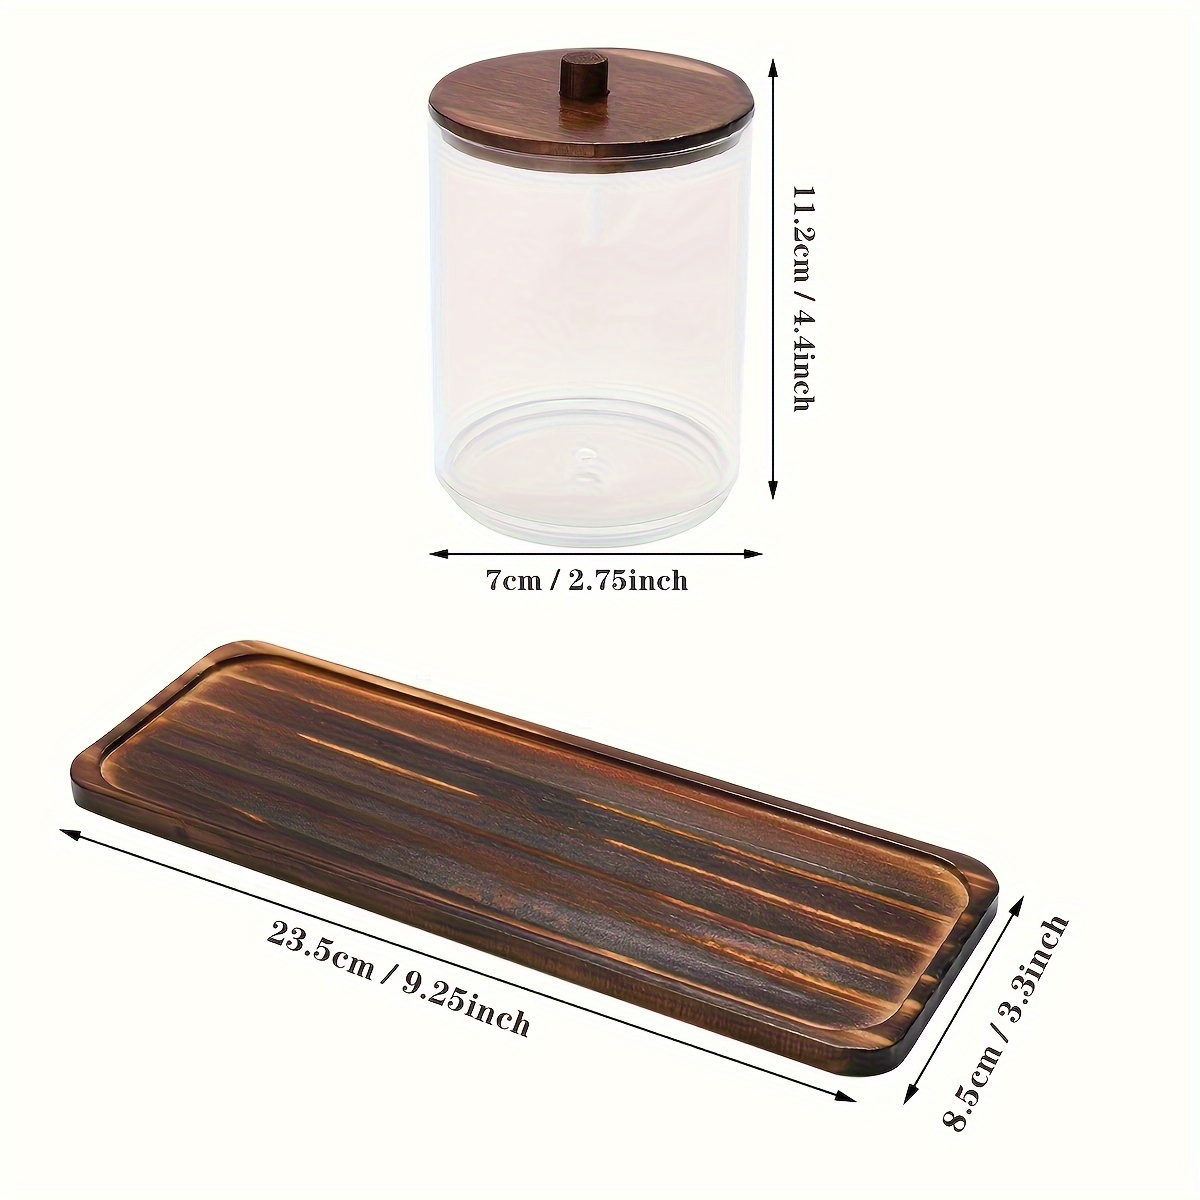 3pcs Cotton Swab Holder Dispenser With 1pc Tray, Retro 10 Oz Bathroom  Organizers And Storage Containers, Clear Plastic Apothecary Jars With Wood  Lids